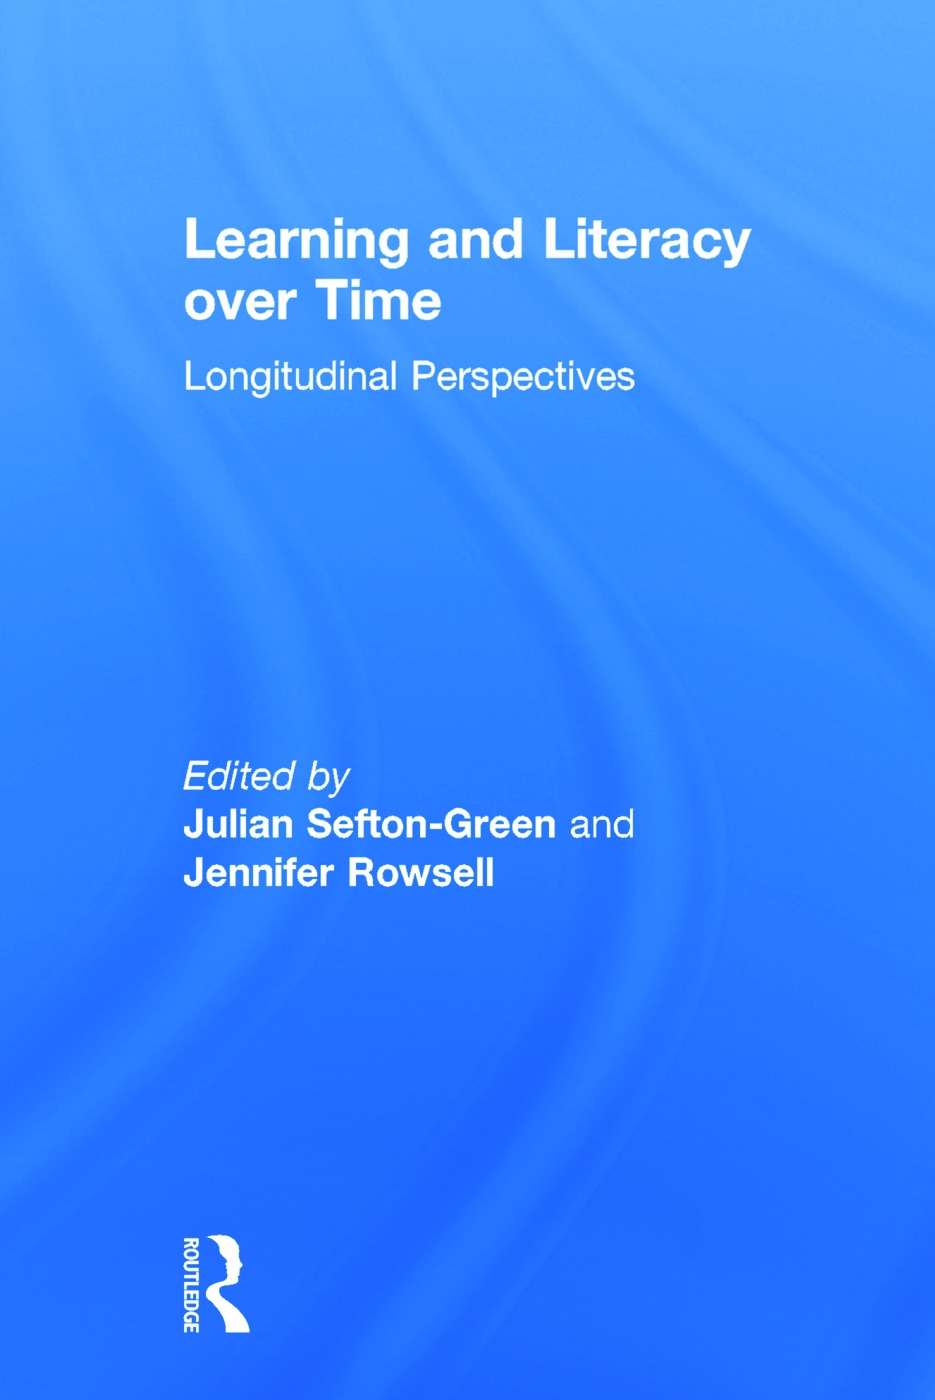 Learning and Literacy Over Time: Longitudinal Perspectives